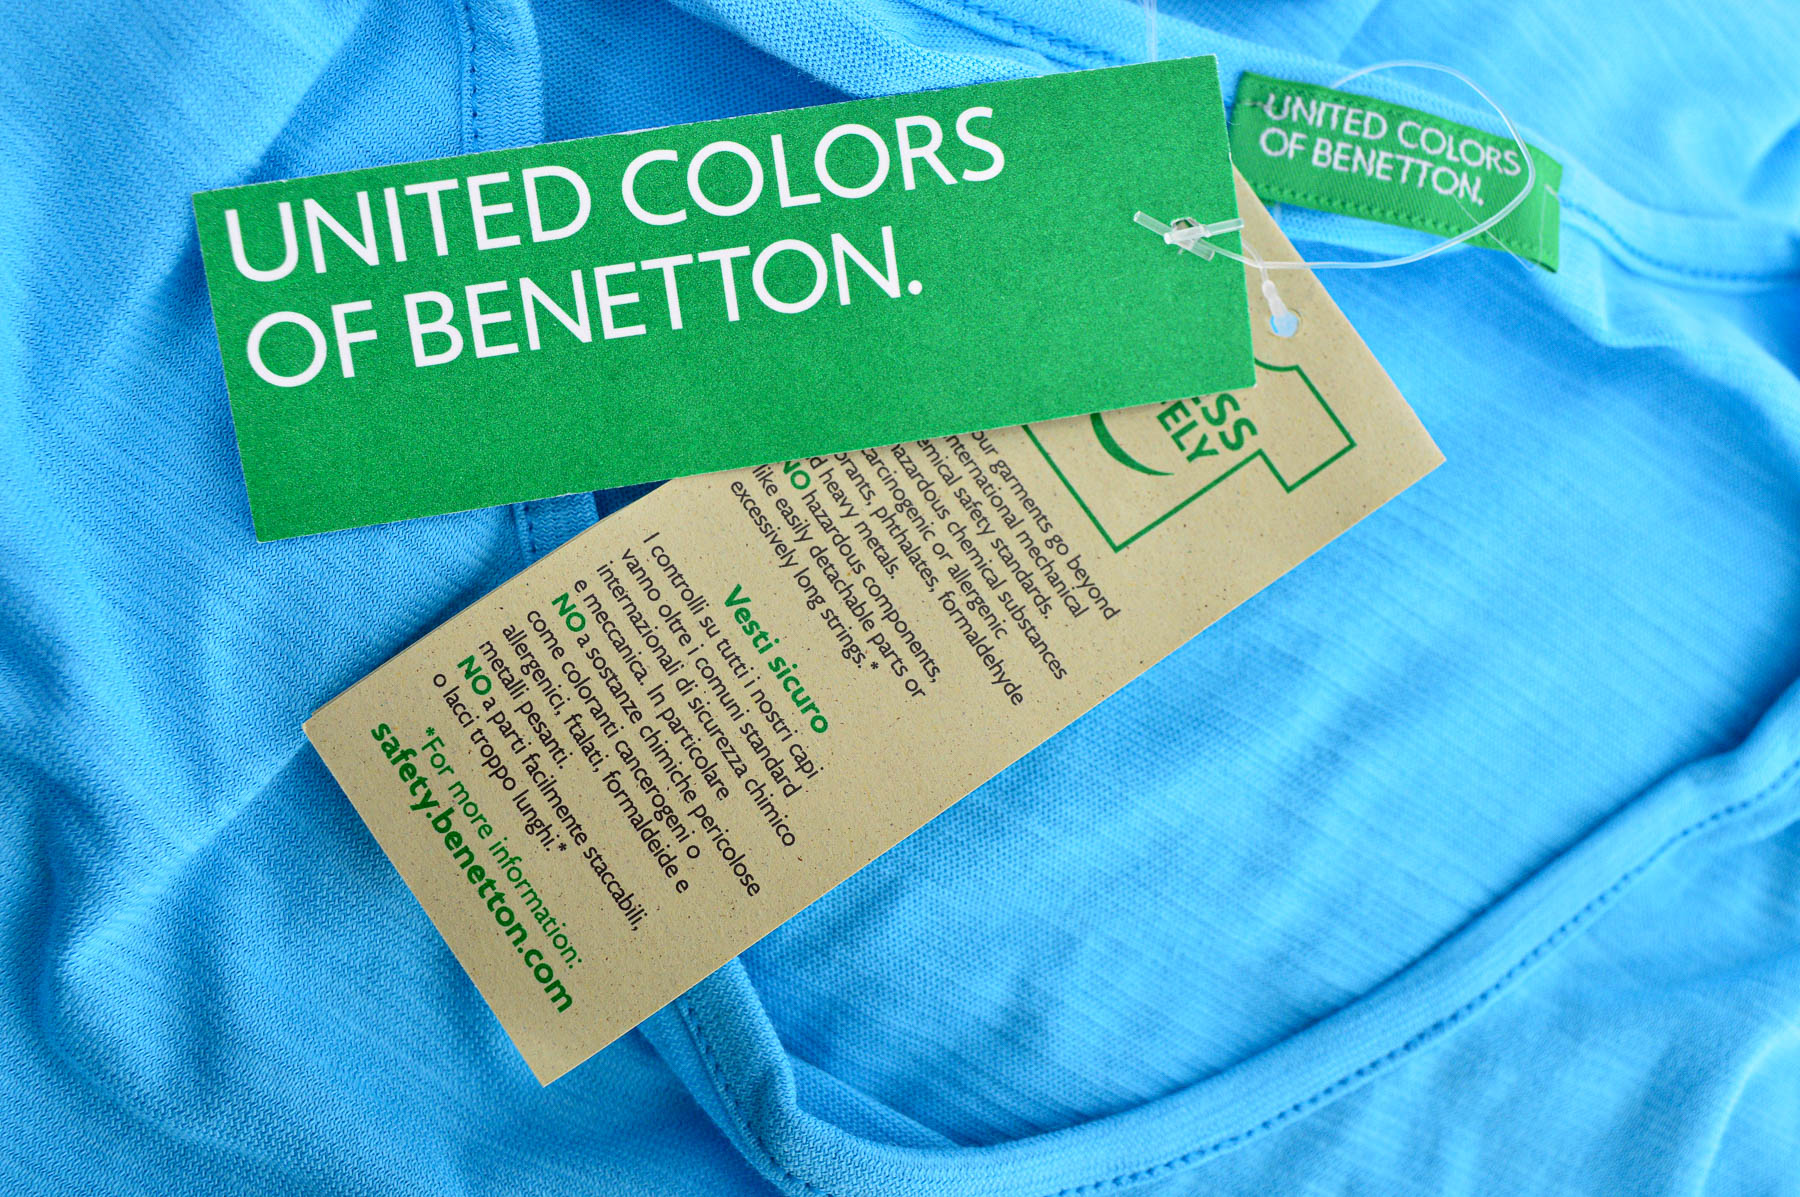 Child's dress - United Colors of Benetton - 2